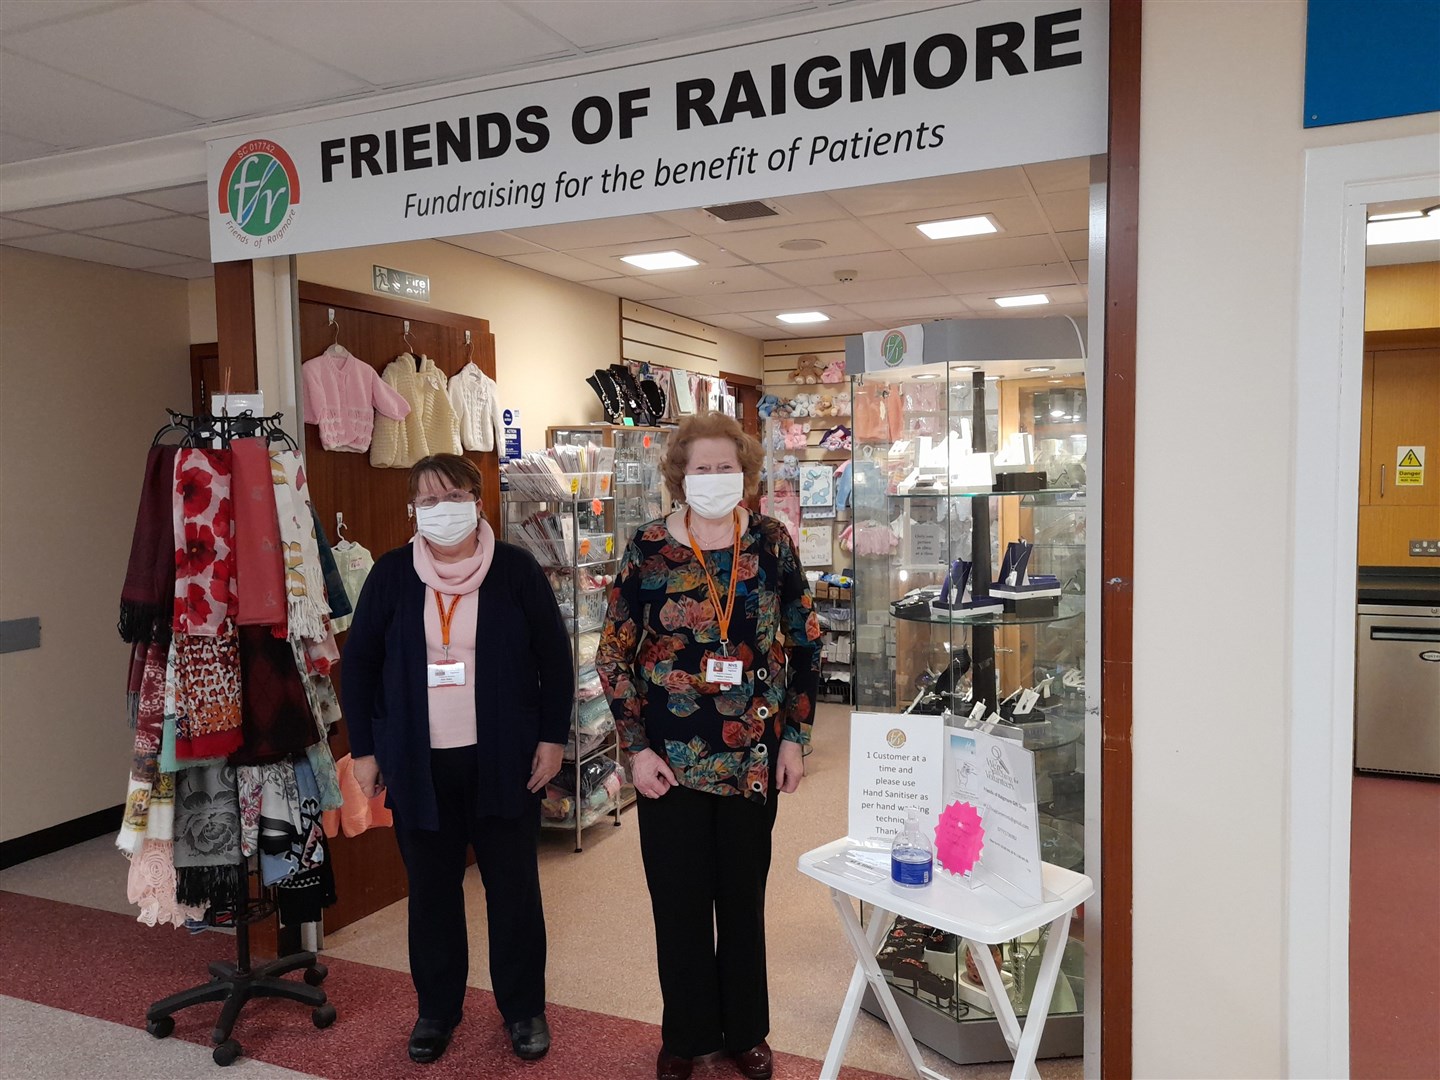 Jean Slater and Christina Cameron from the Friends of Raigmore.